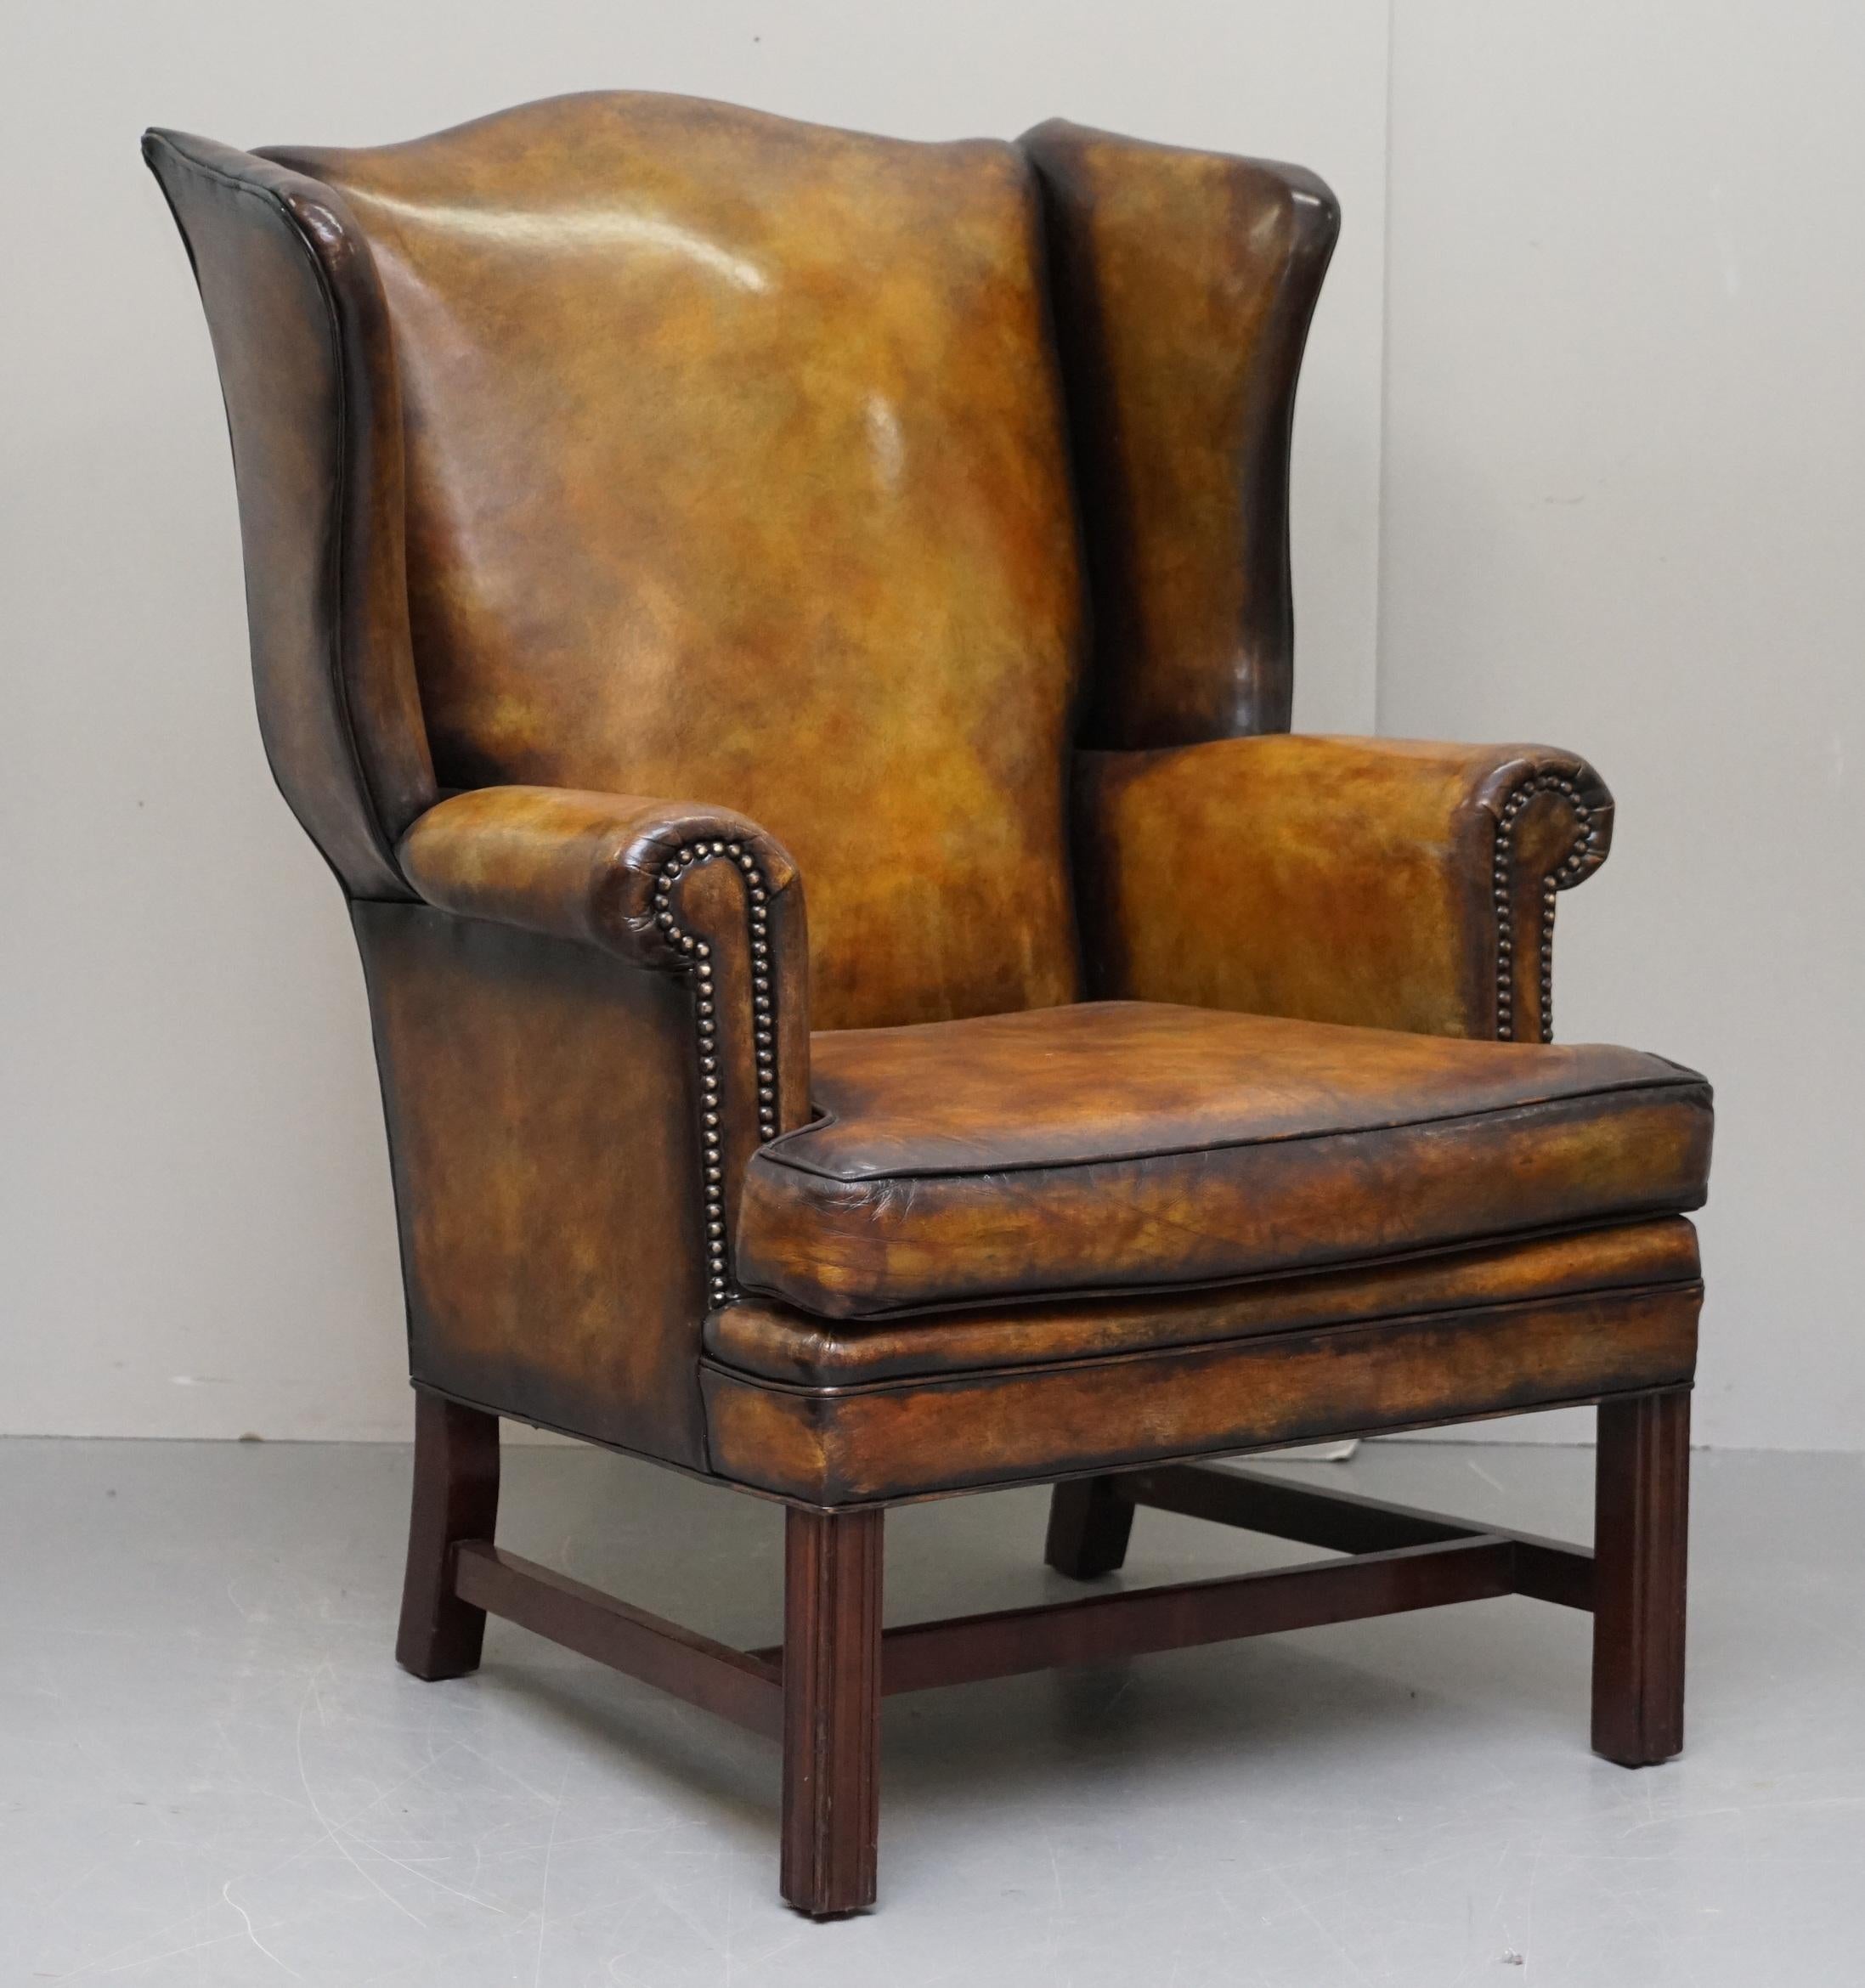 We are delighted to offer for sale this sublime pair of fully restored vintage wingback armchairs in cigar brown leather 

A good looking and comfortable pair of coil sprung vintage wingback armchairs, these are good country house chairs that look